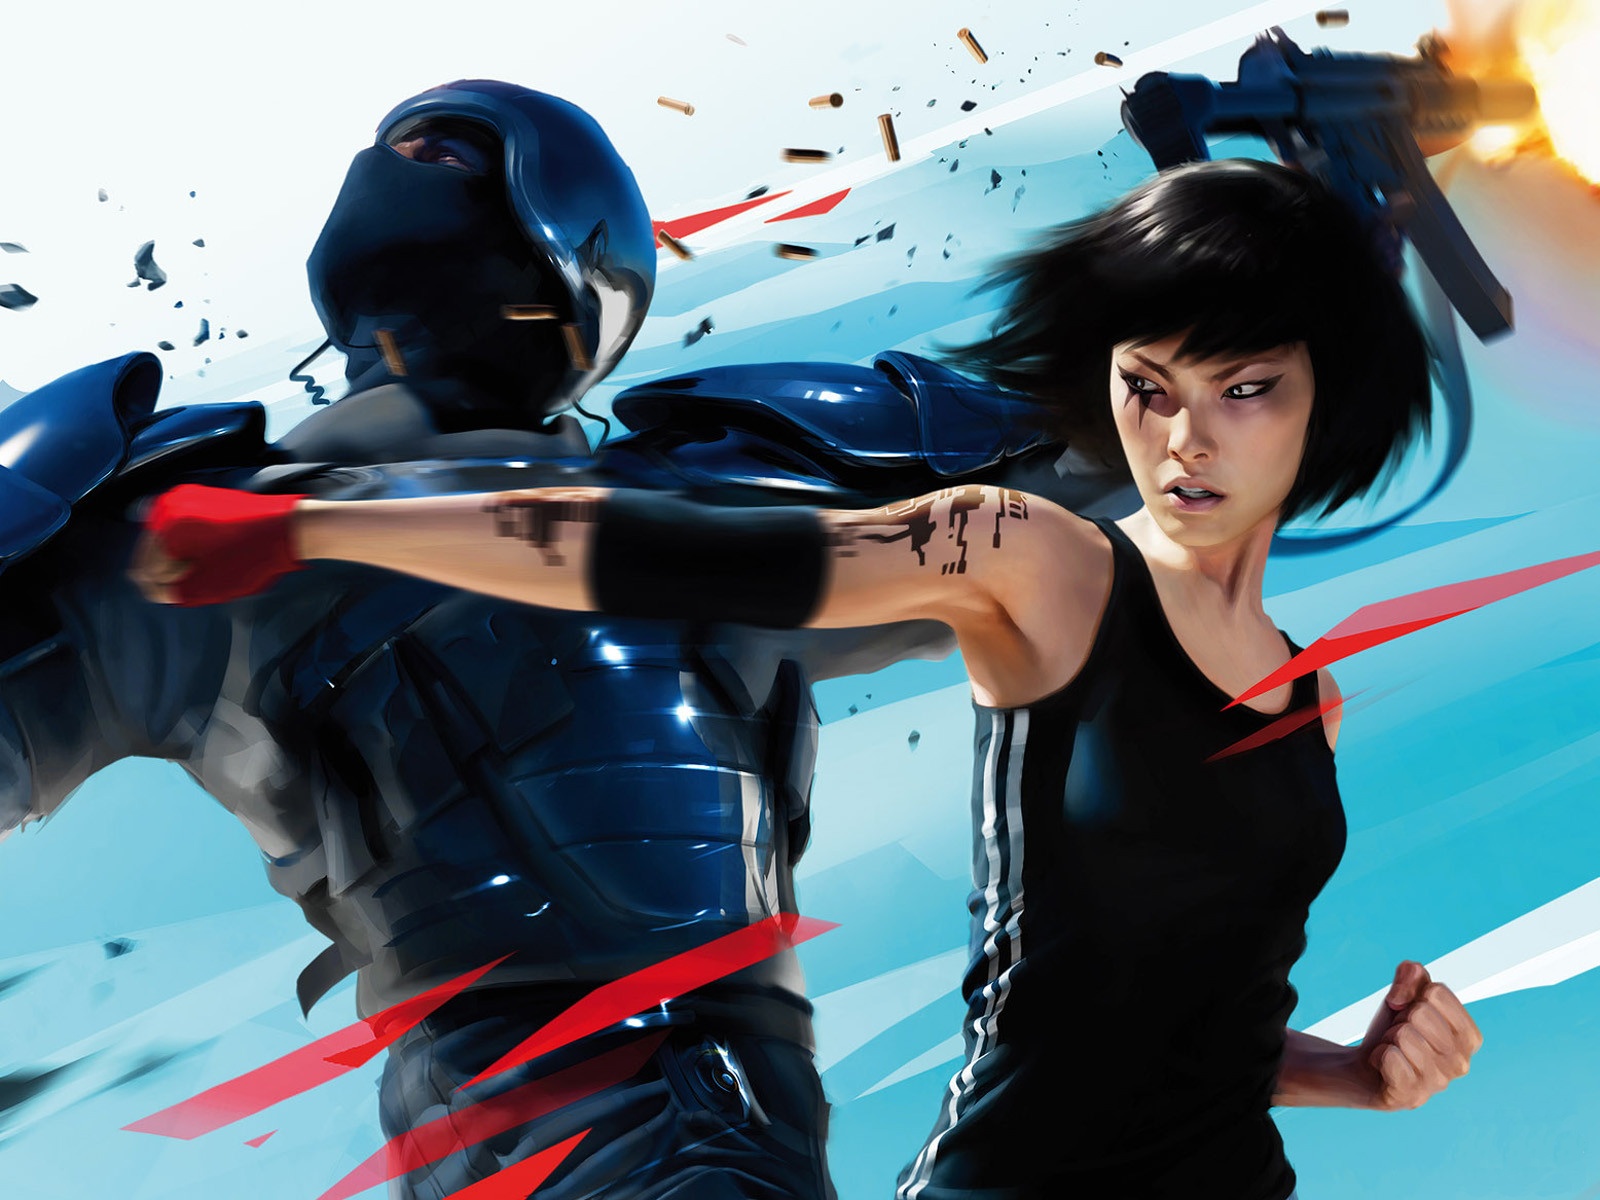 Image Mirror's Edge vdeo game 1600x1200 Games